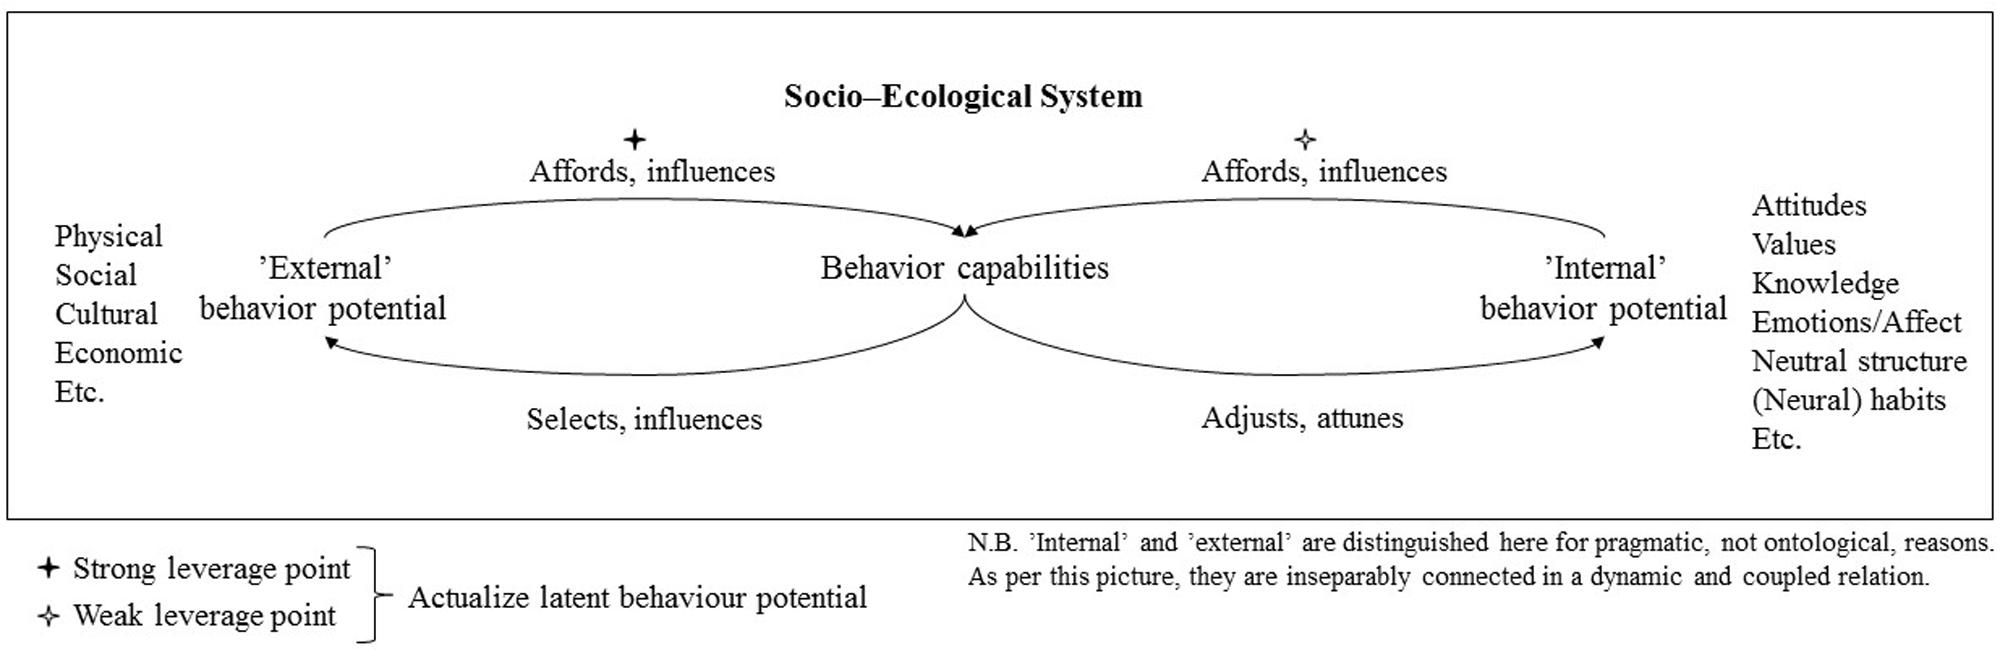 Fremskynde Allieret uøkonomisk Frontiers | Affording Sustainability: Adopting a Theory of Affordances as a  Guiding Heuristic for Environmental Policy | Psychology